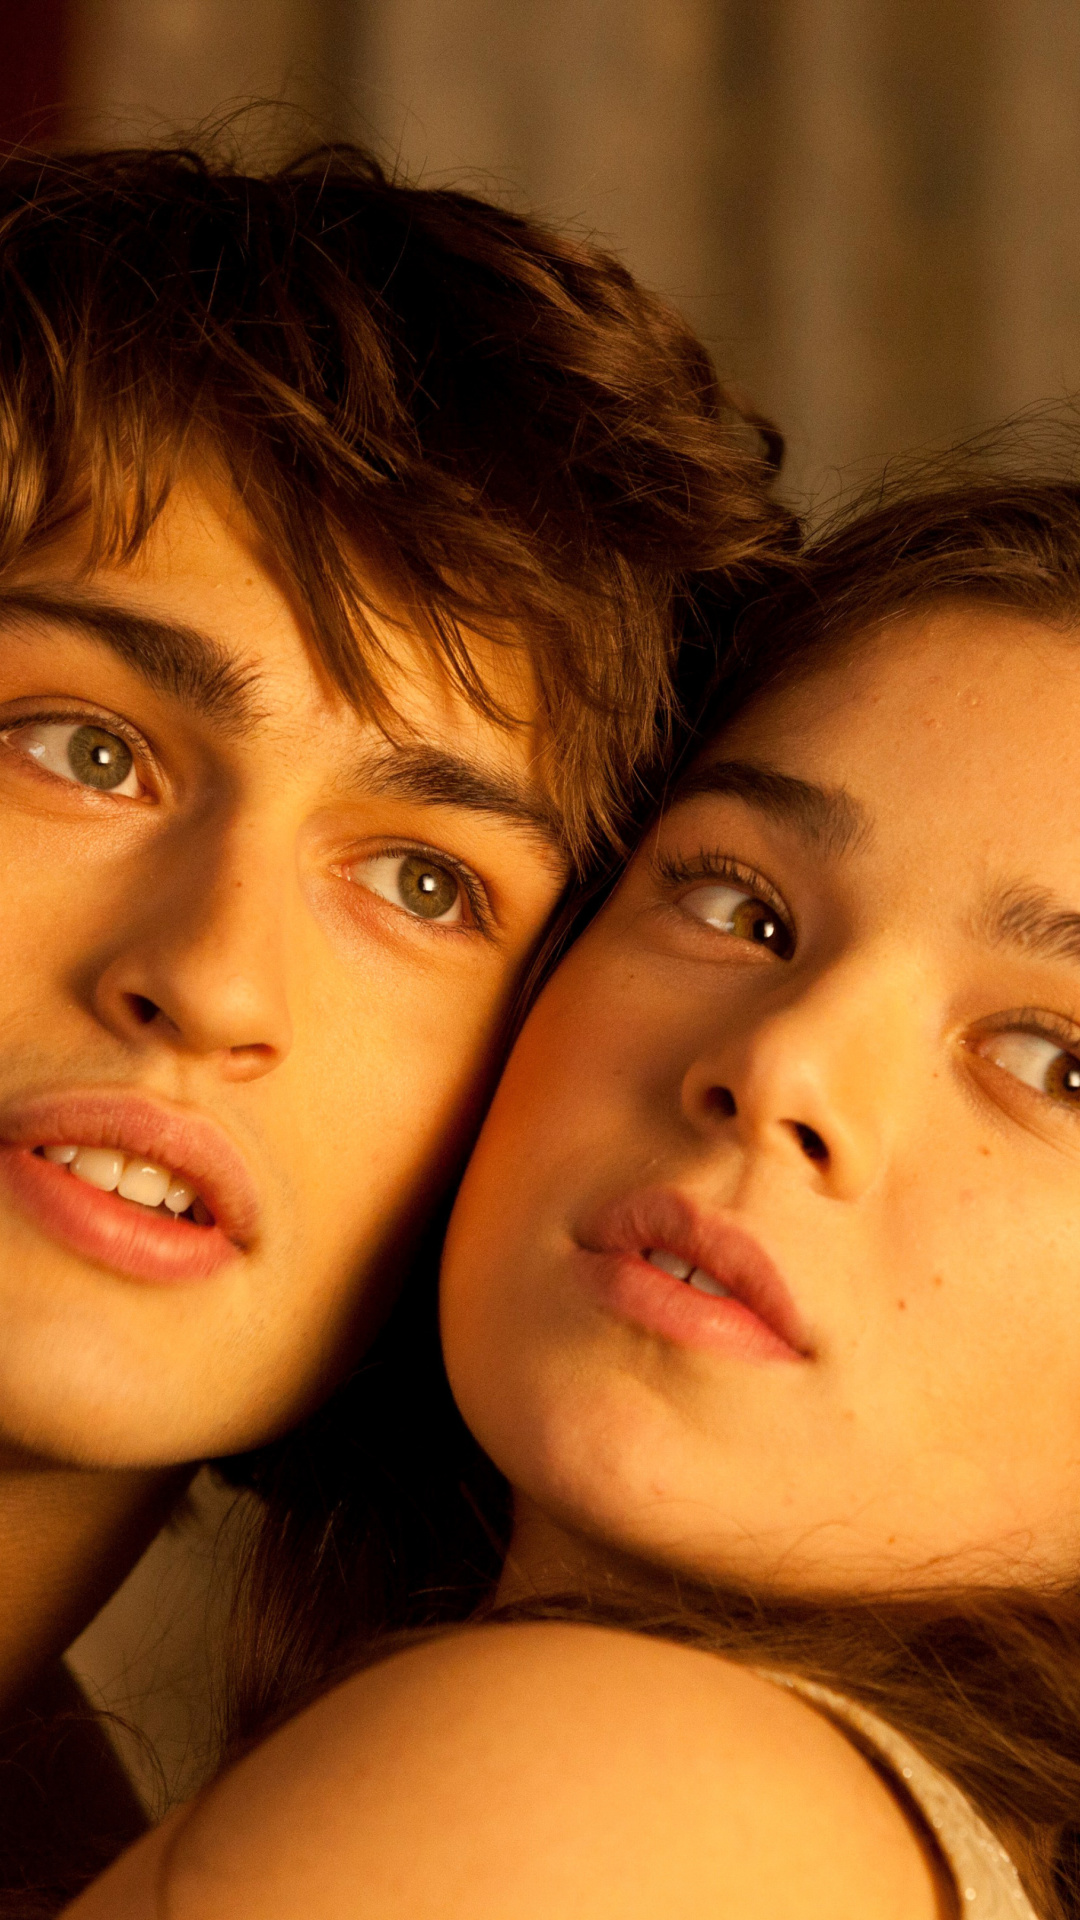 Das Romeo and Juliet with Hailee Steinfeld and Douglas Booth Wallpaper 1080x1920